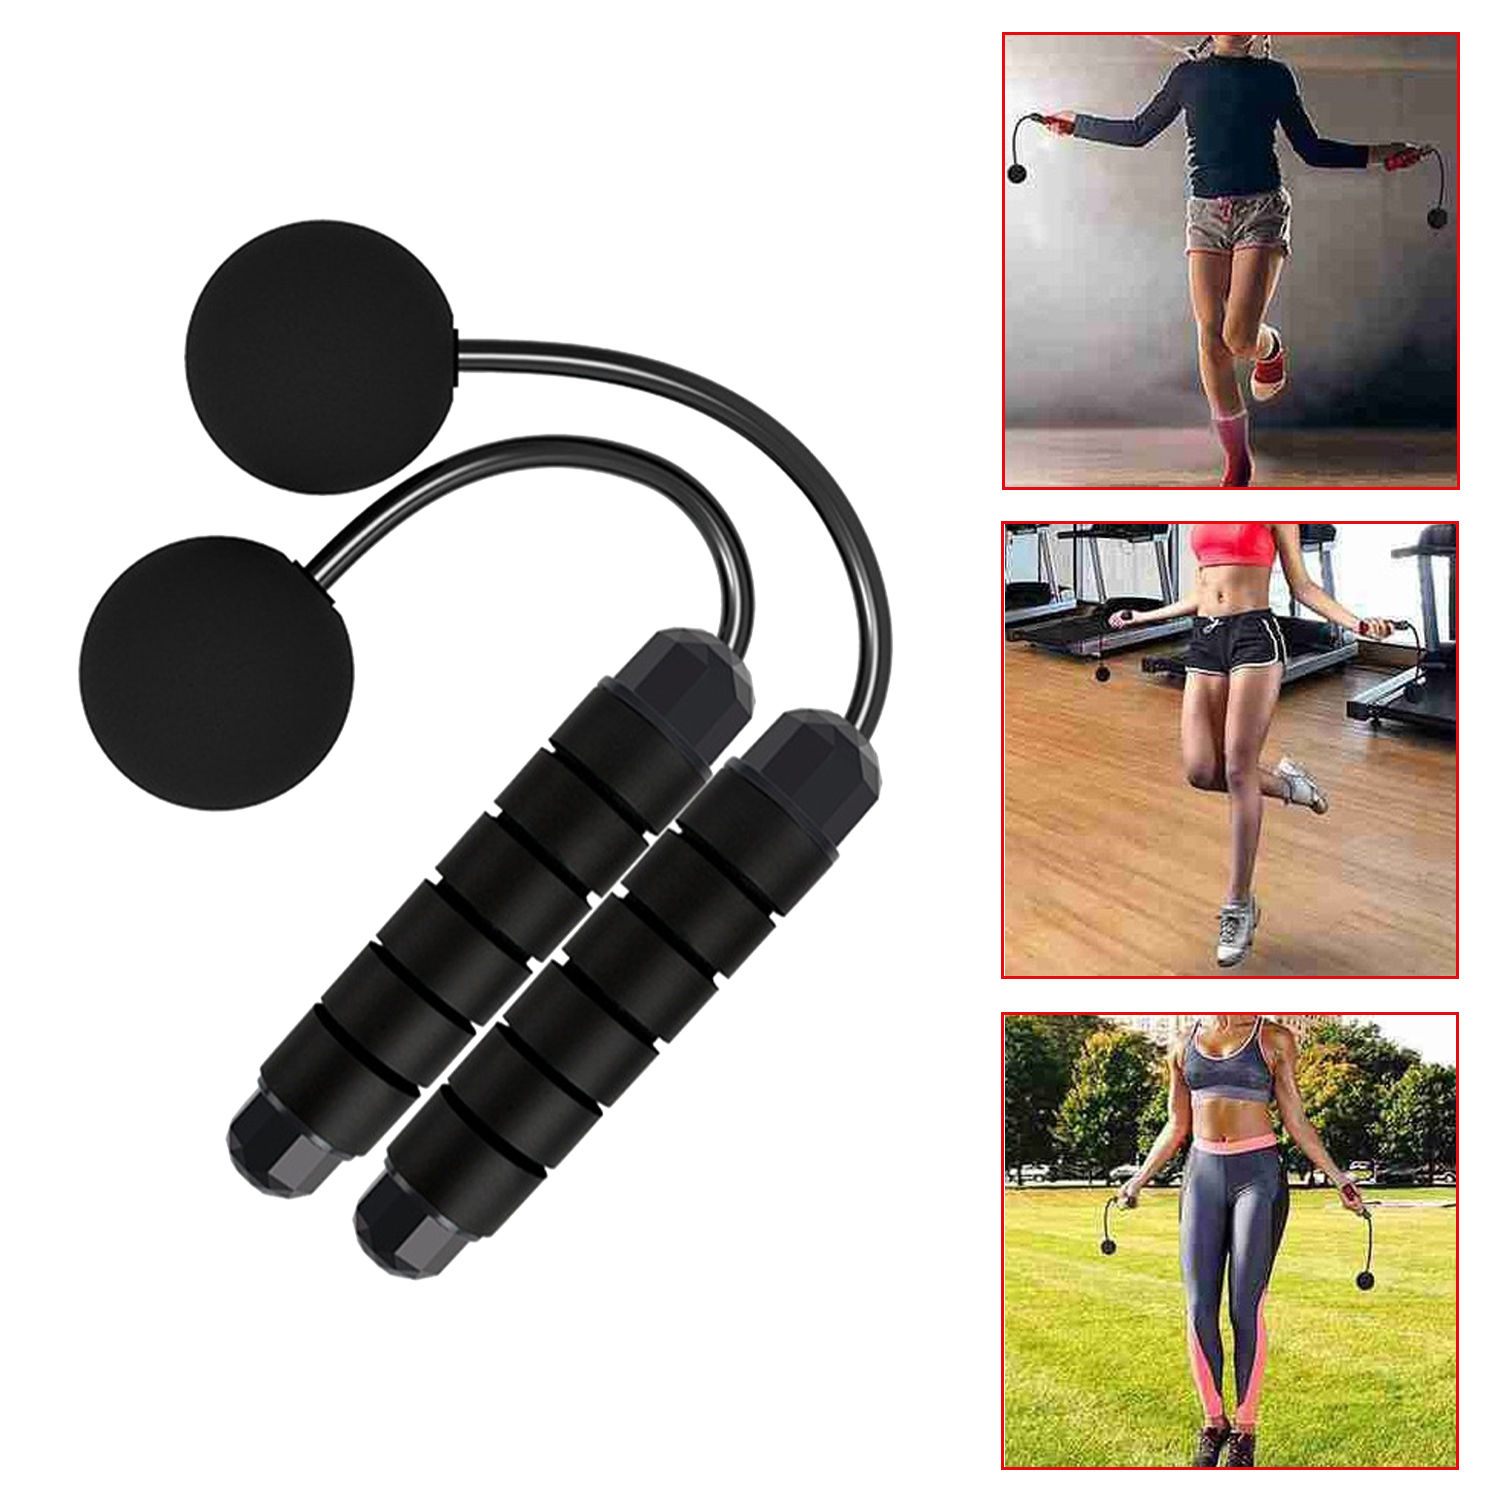 Skipping Speed Wireless Ropeless Cordless Jump Rope Without Rope For Adults & Children